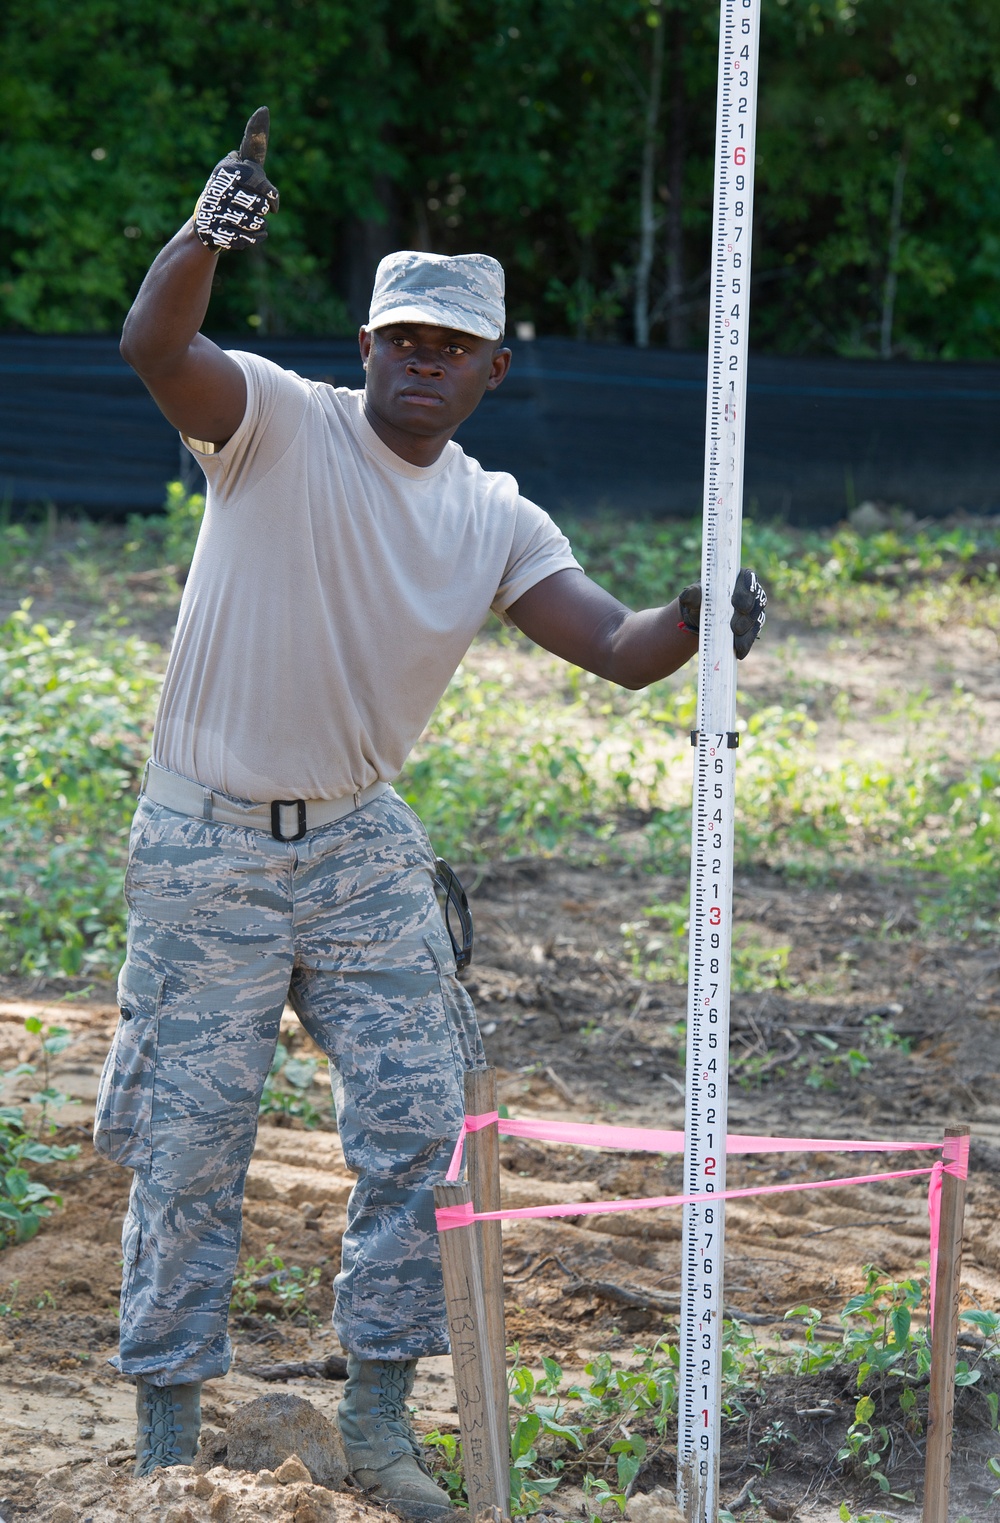 166th Civil Engineer Squadron install concrete storm water pipes for Camp Kamassa.